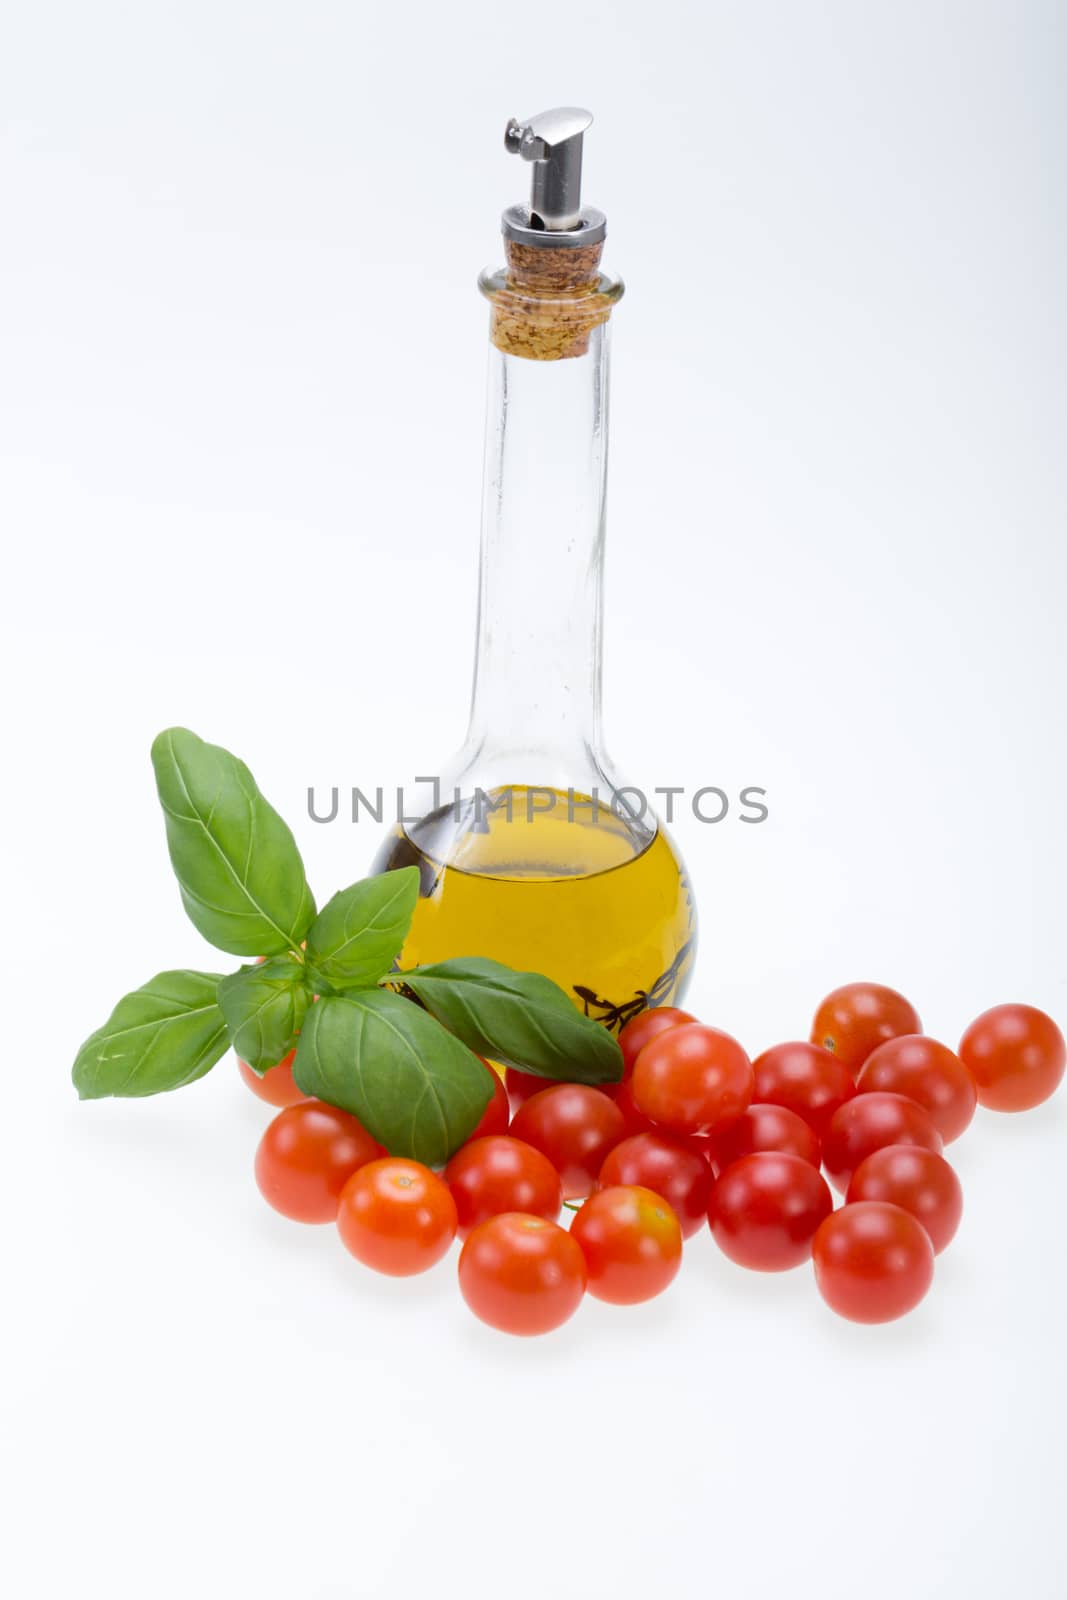  Basil, tomatoes and olive oil with the thyme